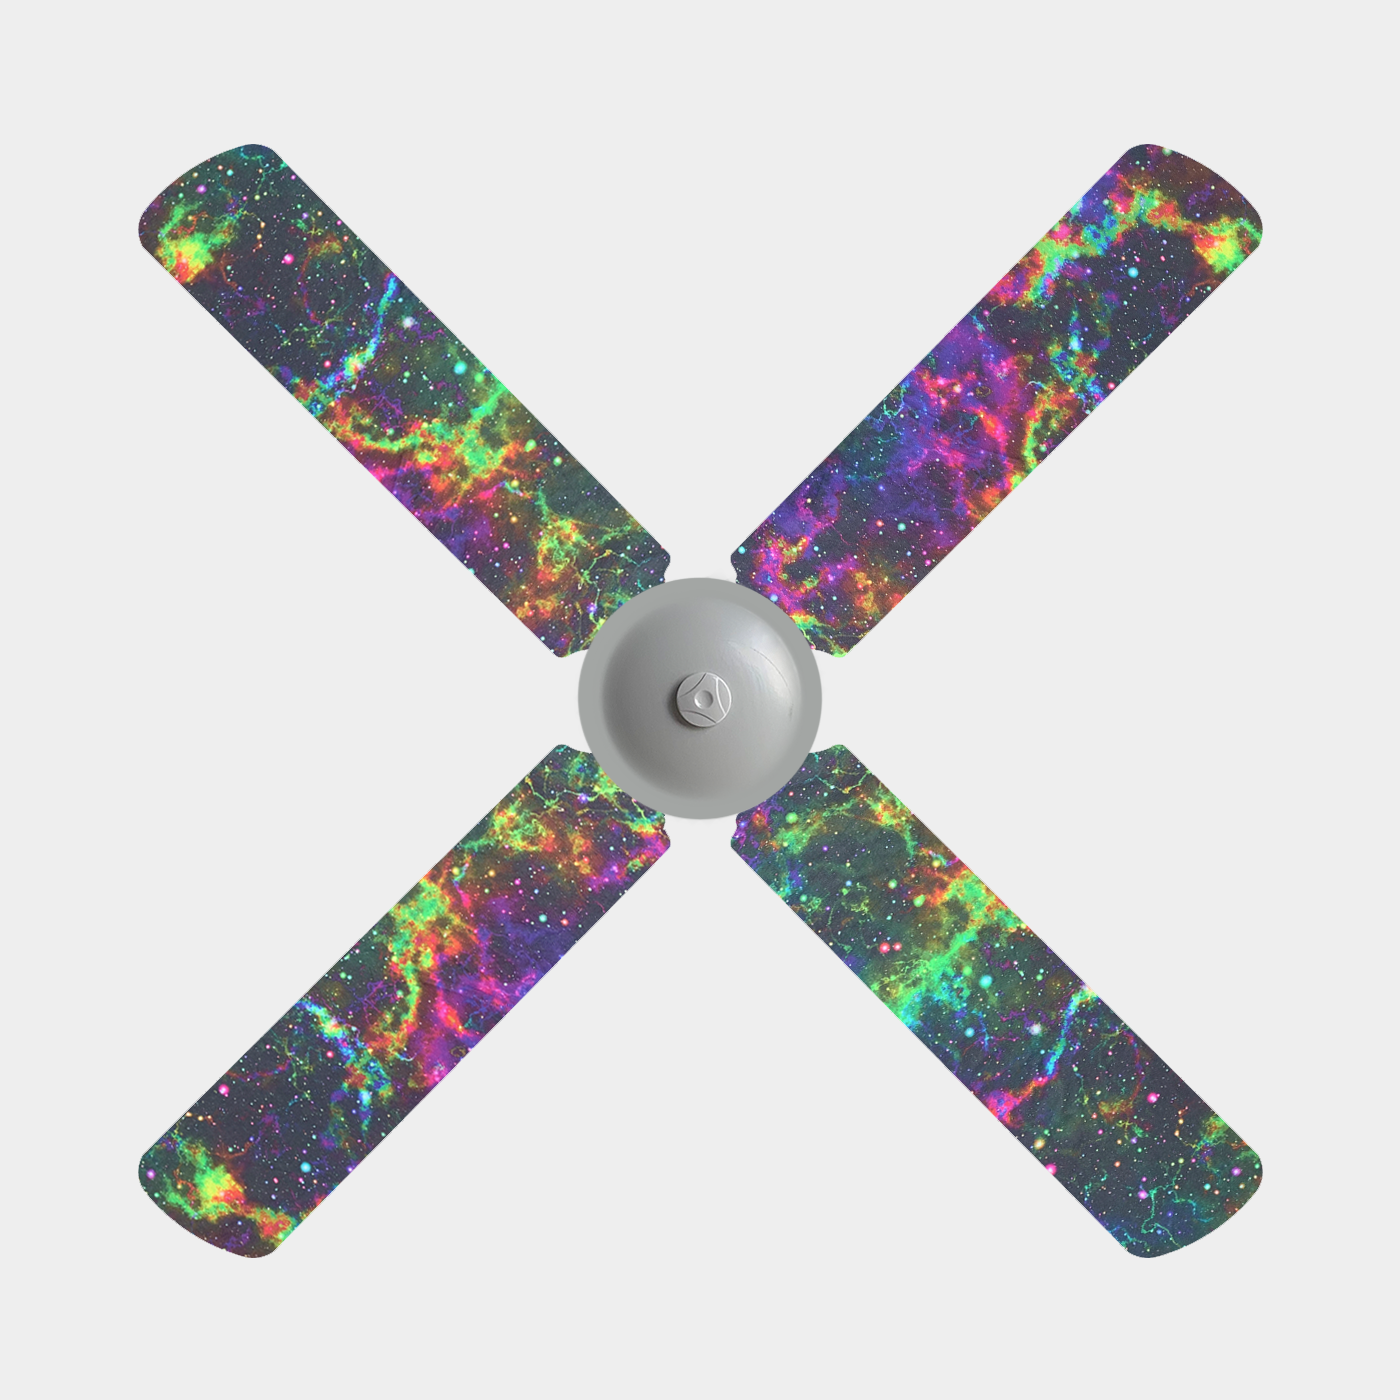 Four bright coloured nebula galaxy design on a black background ceiling fan blade covers